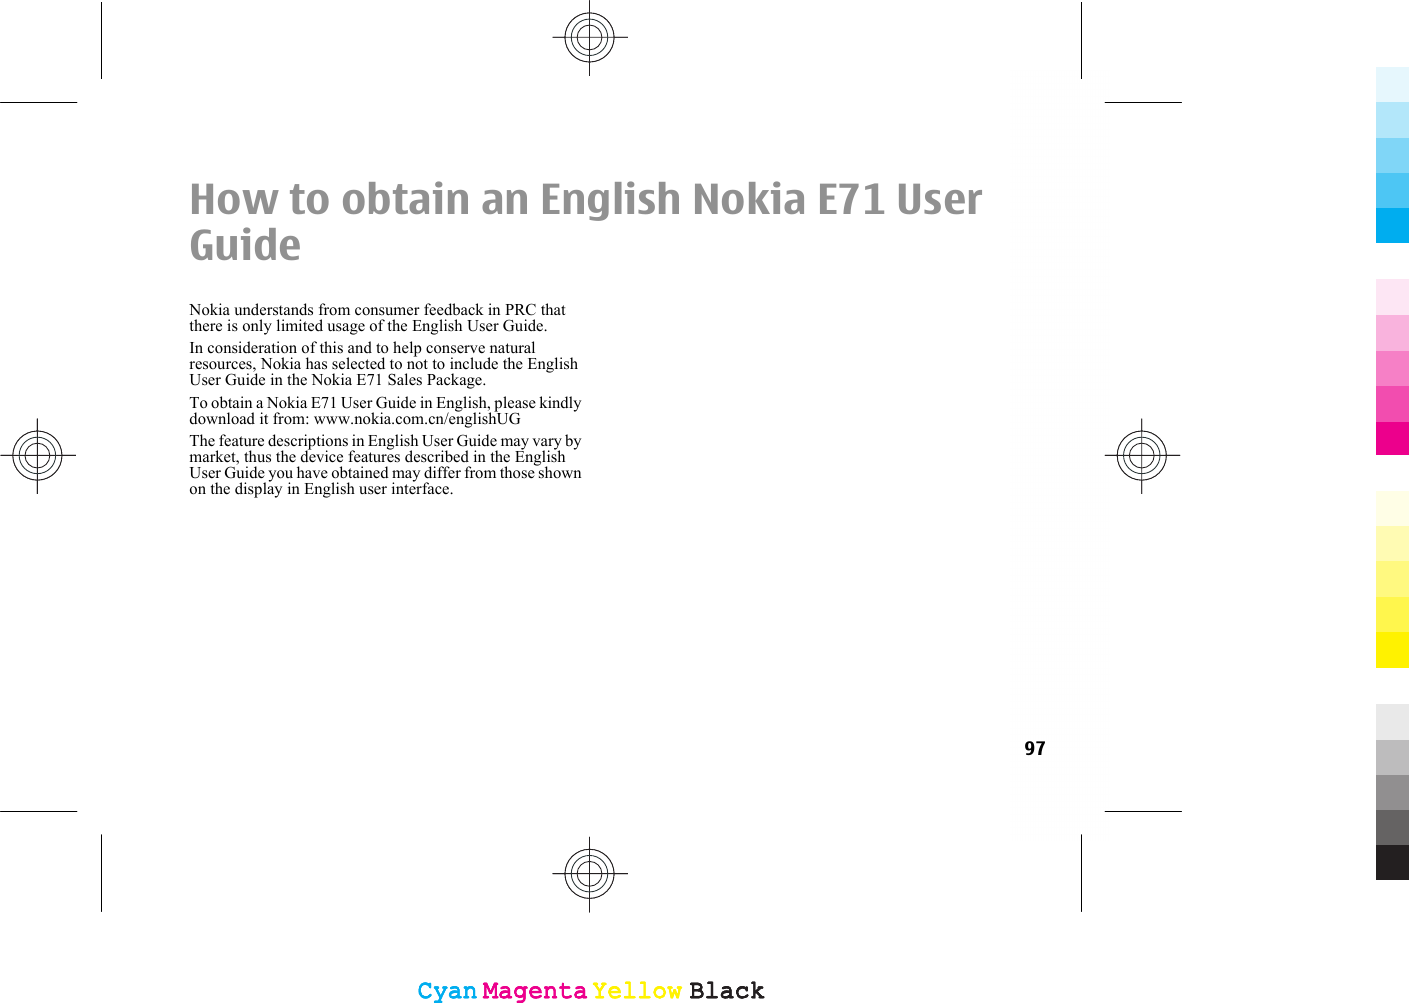 How to obtain an English Nokia E71 UserGuideNokia understands from consumer feedback in PRC thatthere is only limited usage of the English User Guide.In consideration of this and to help conserve naturalresources, Nokia has selected to not to include the EnglishUser Guide in the Nokia E71 Sales Package.To obtain a Nokia E71 User Guide in English, please kindlydownload it from: www.nokia.com.cn/englishUGThe feature descriptions in English User Guide may vary bymarket, thus the device features described in the EnglishUser Guide you have obtained may differ from those shownon the display in English user interface.97CyanCyanMagentaMagentaYellowYellowBlackBlackCyanCyanMagentaMagentaYellowYellowBlackBlack